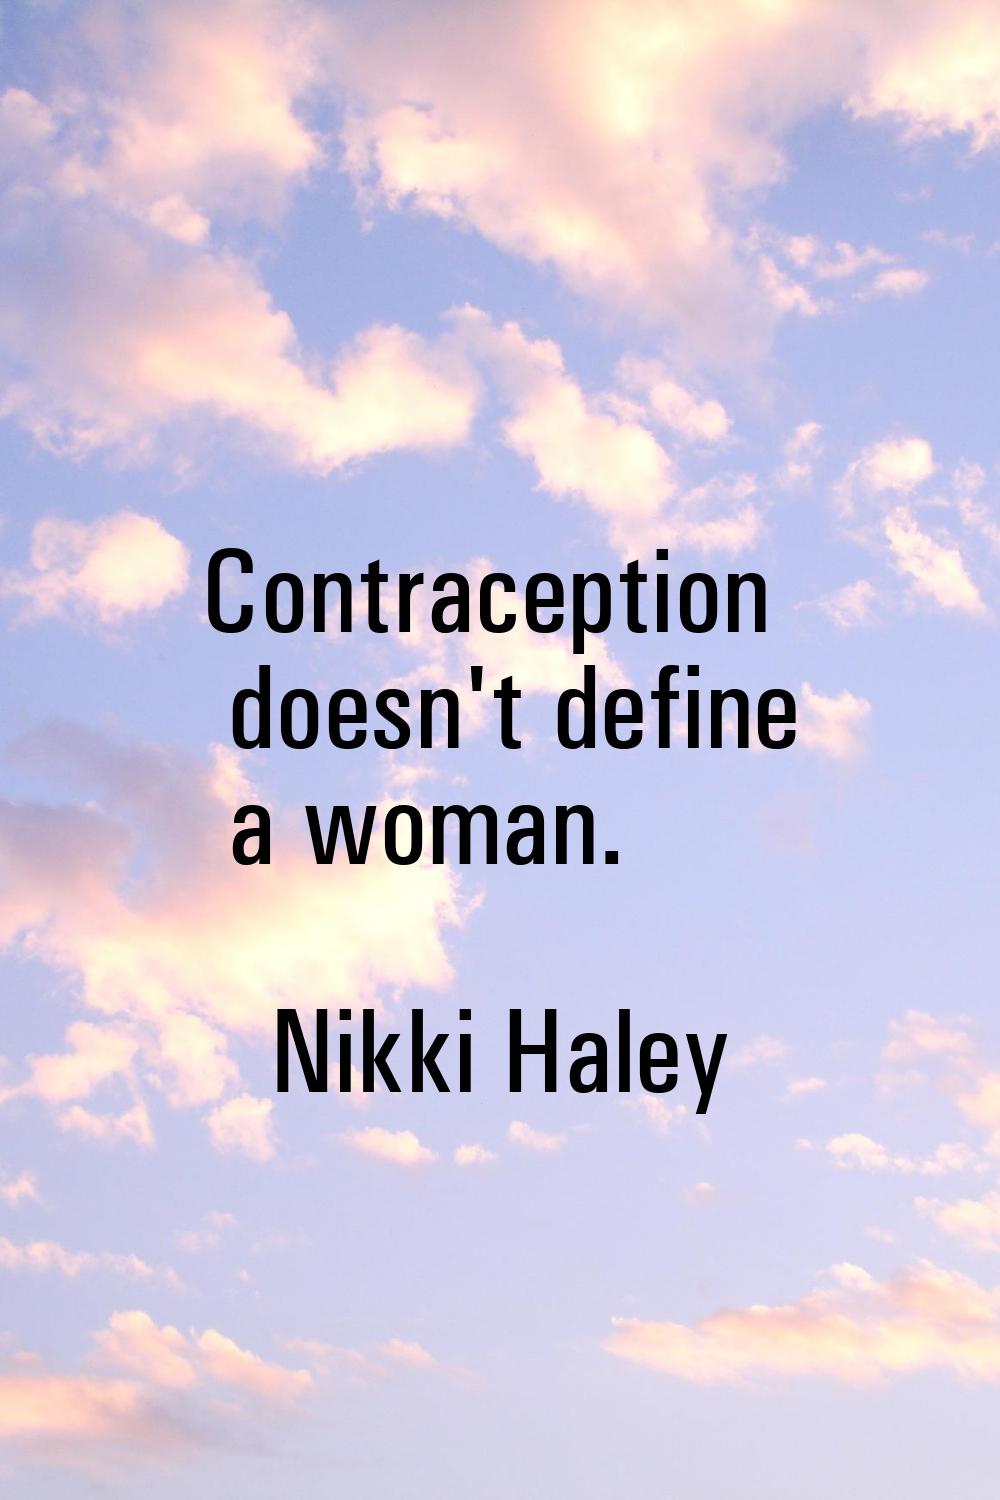 Contraception doesn't define a woman.